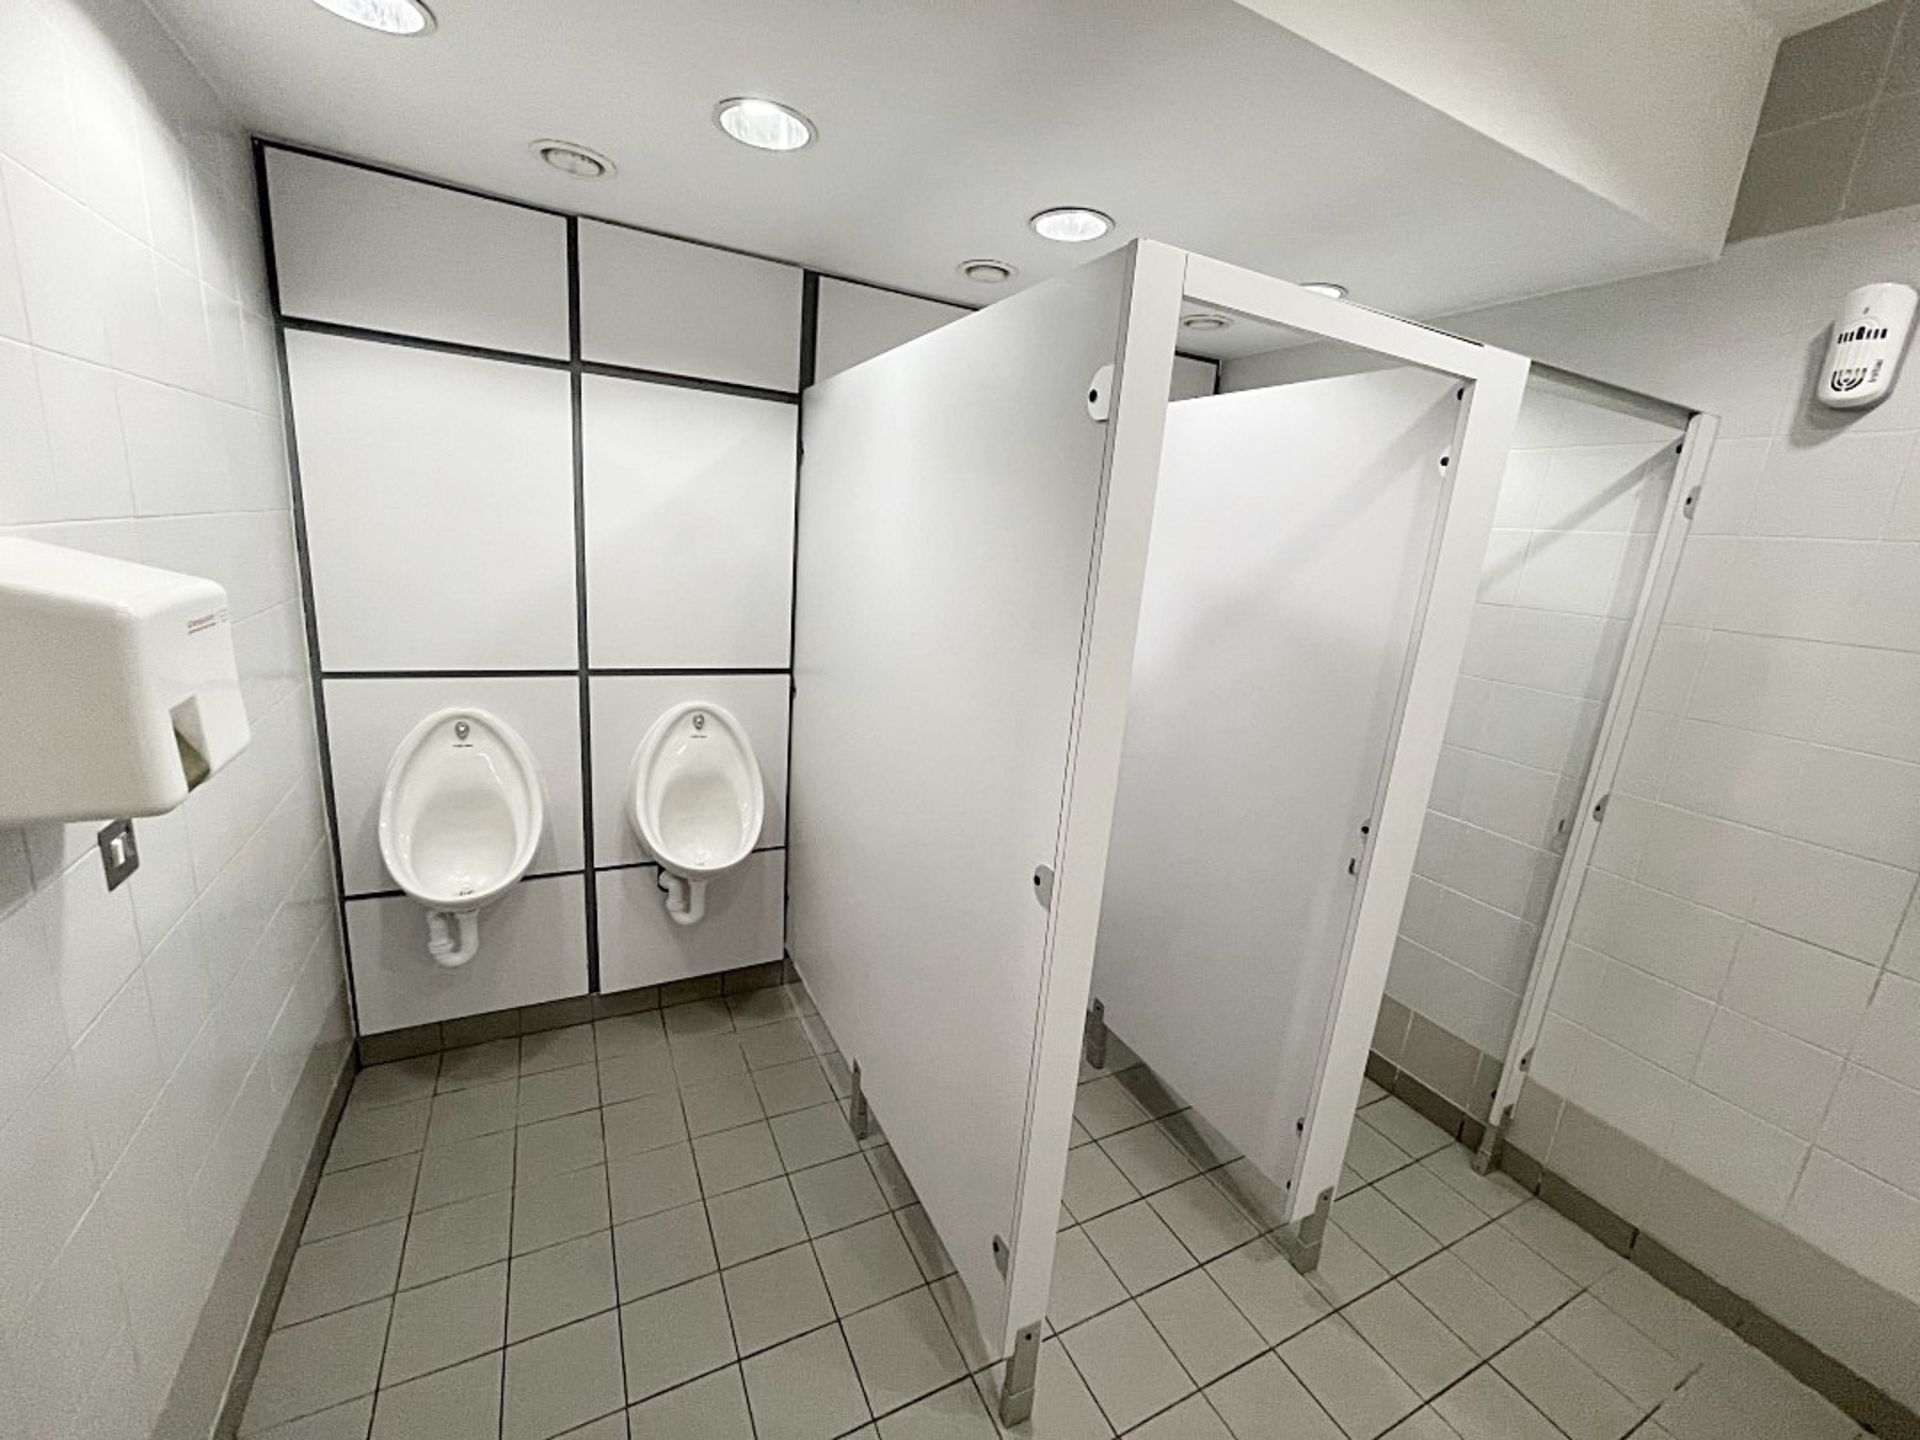 Contents Of Men's Office Bathroom Including Doors, Cubicles And Sanitary Ware *See Full Description* - Image 2 of 4